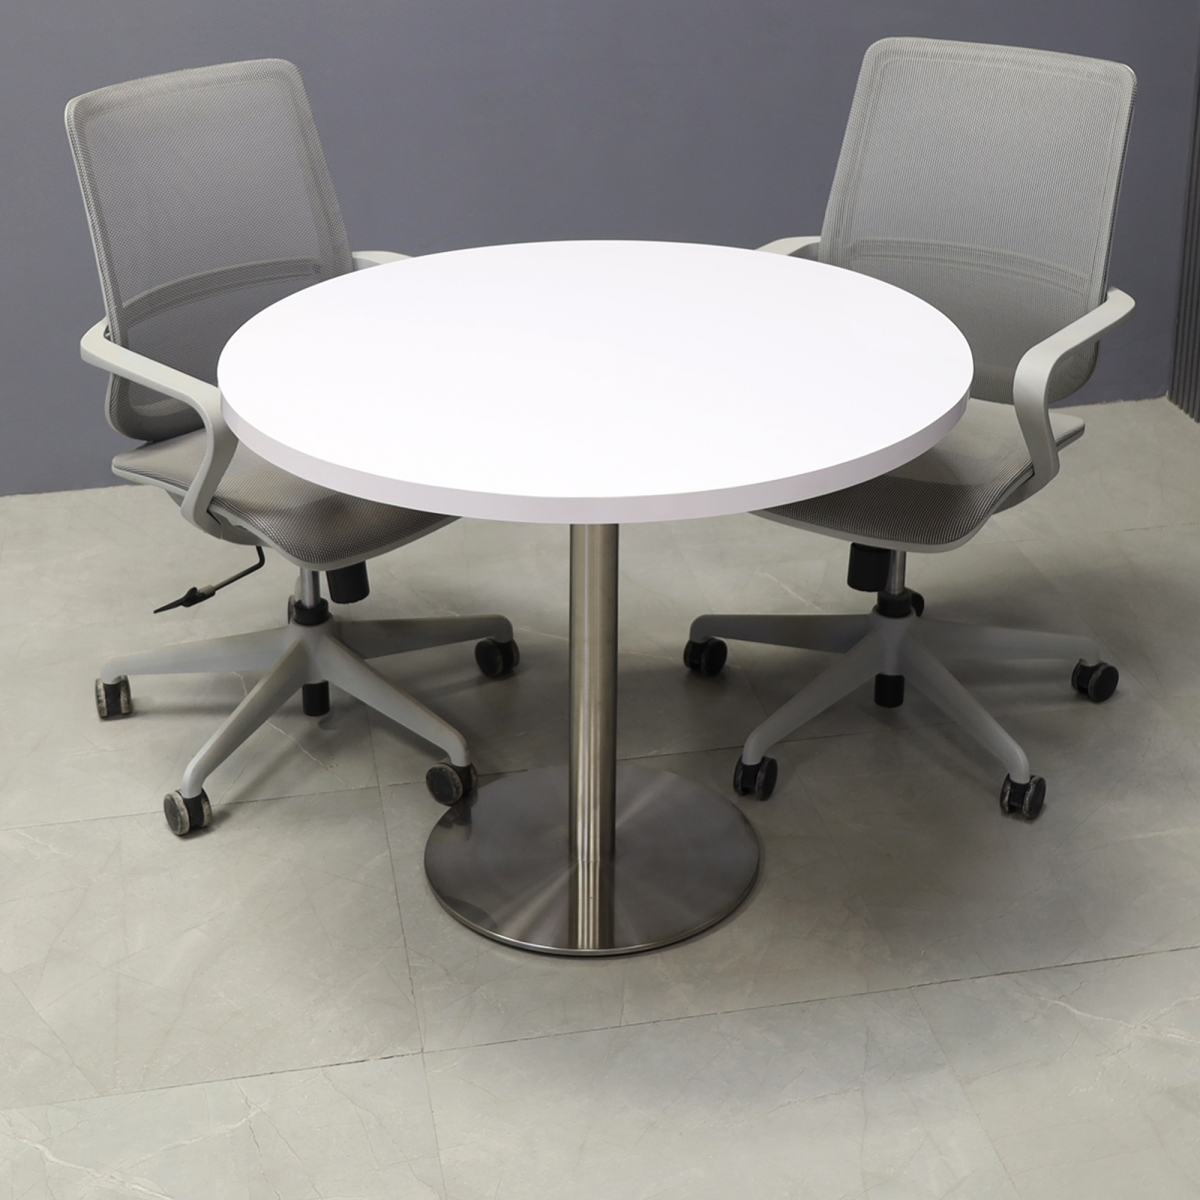 California Round Conference/Cafeteria Table in White Gloss Laminate Top - 36 In. - Stock #68